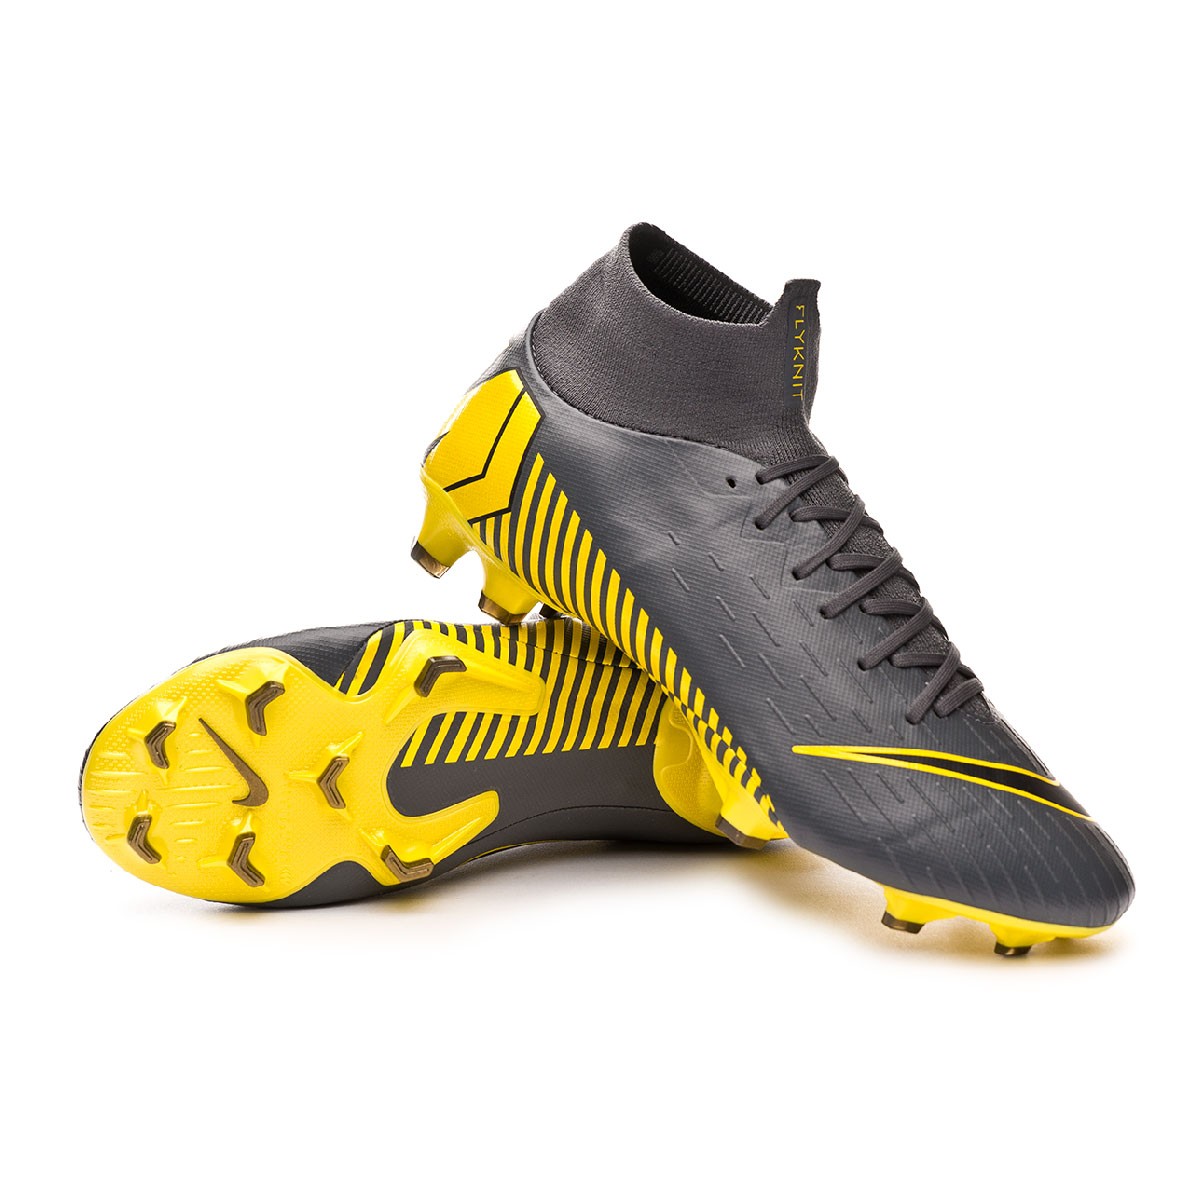 black and yellow mercurials